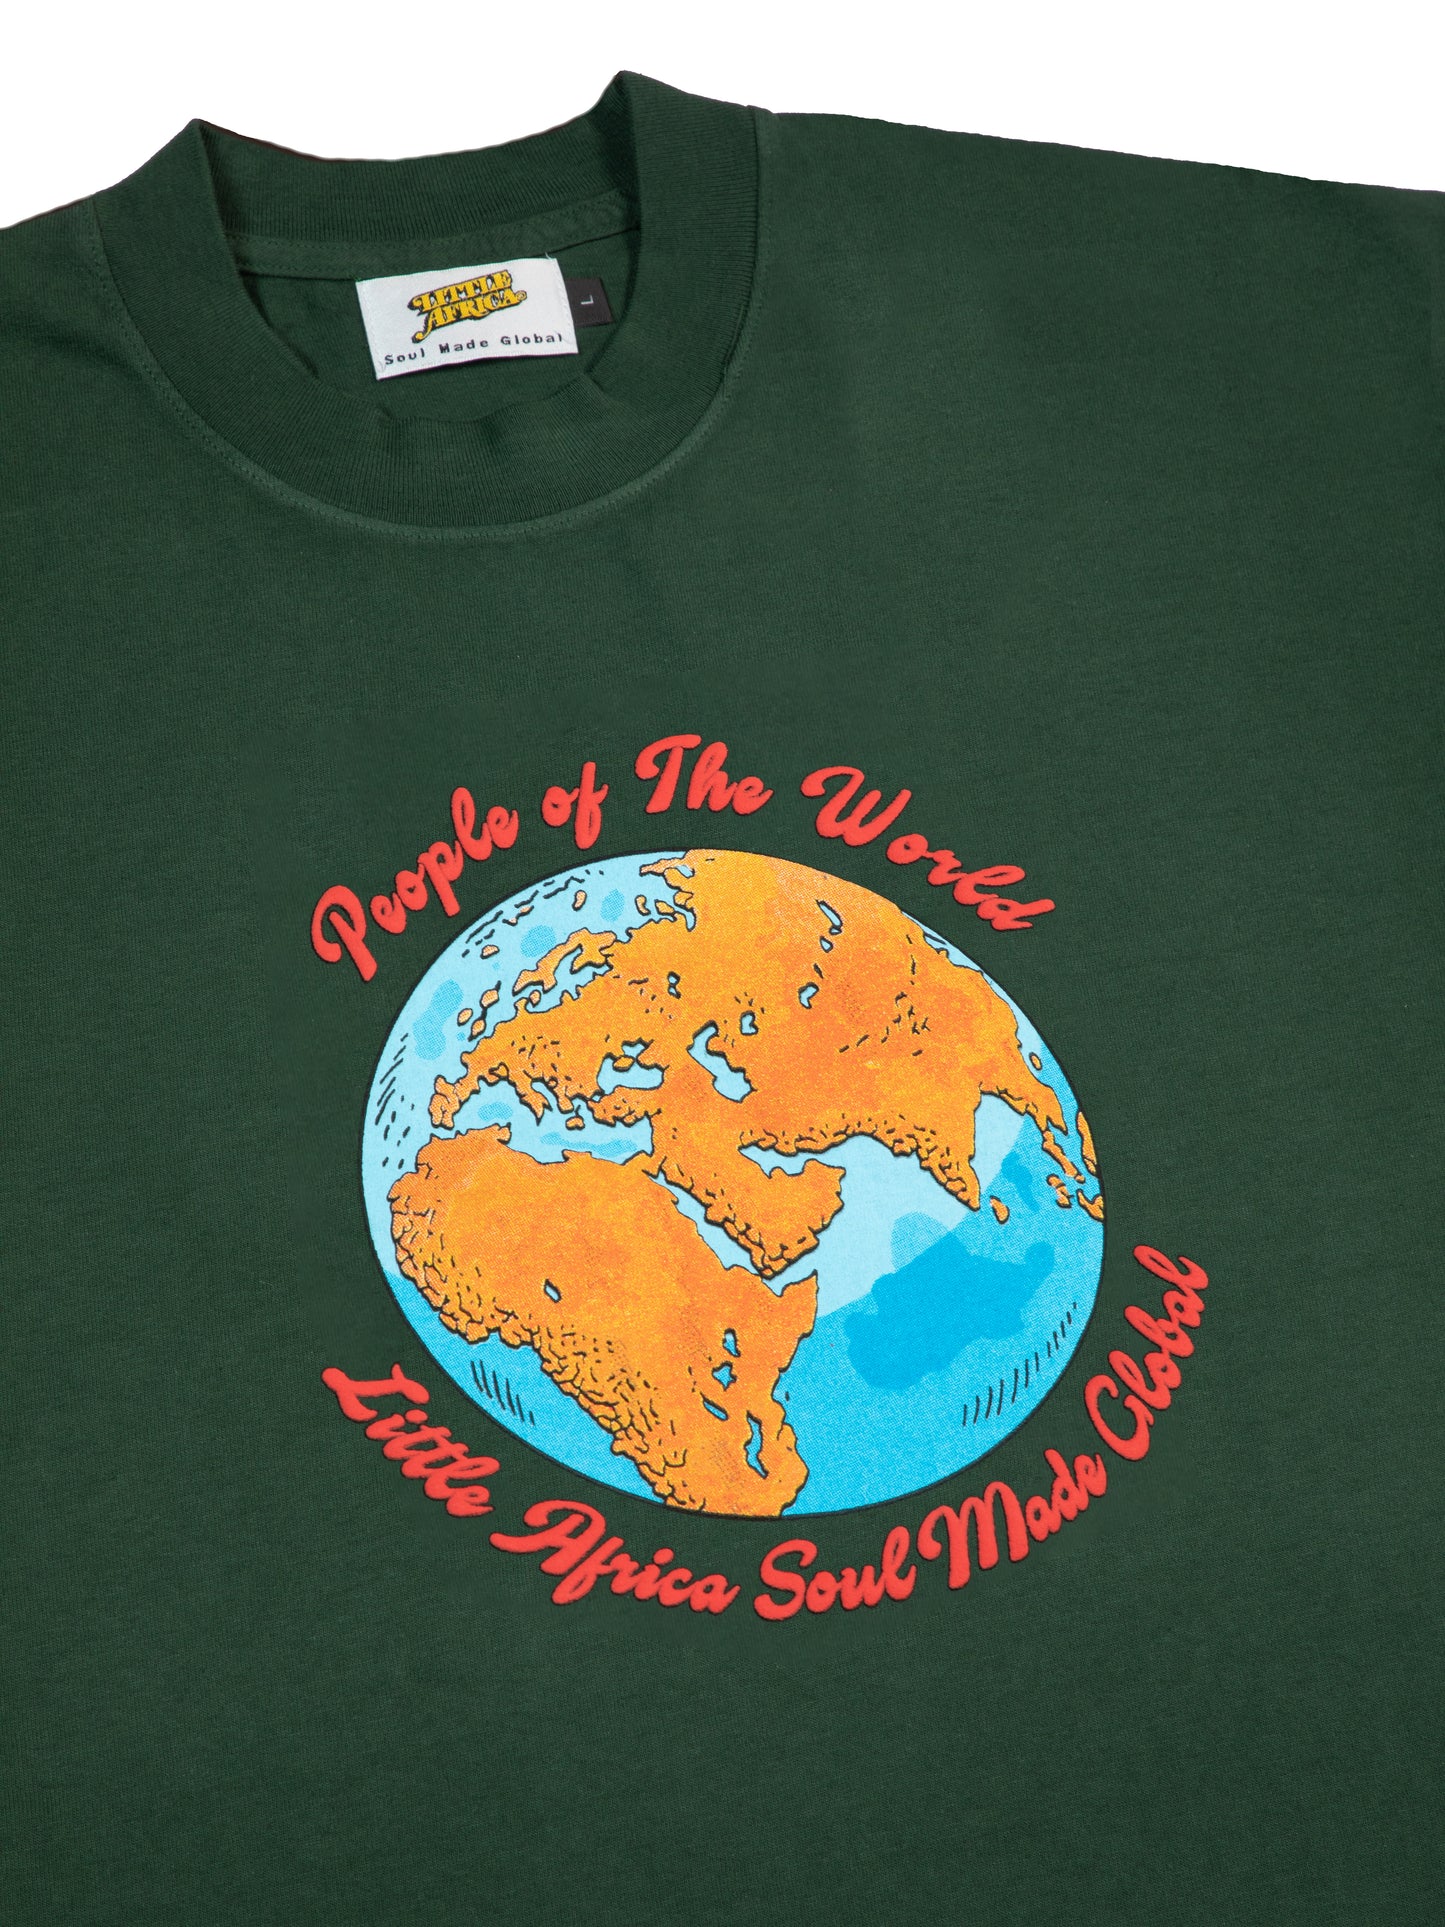 LITTLE AFRICA "People of The World Tee" (Green)